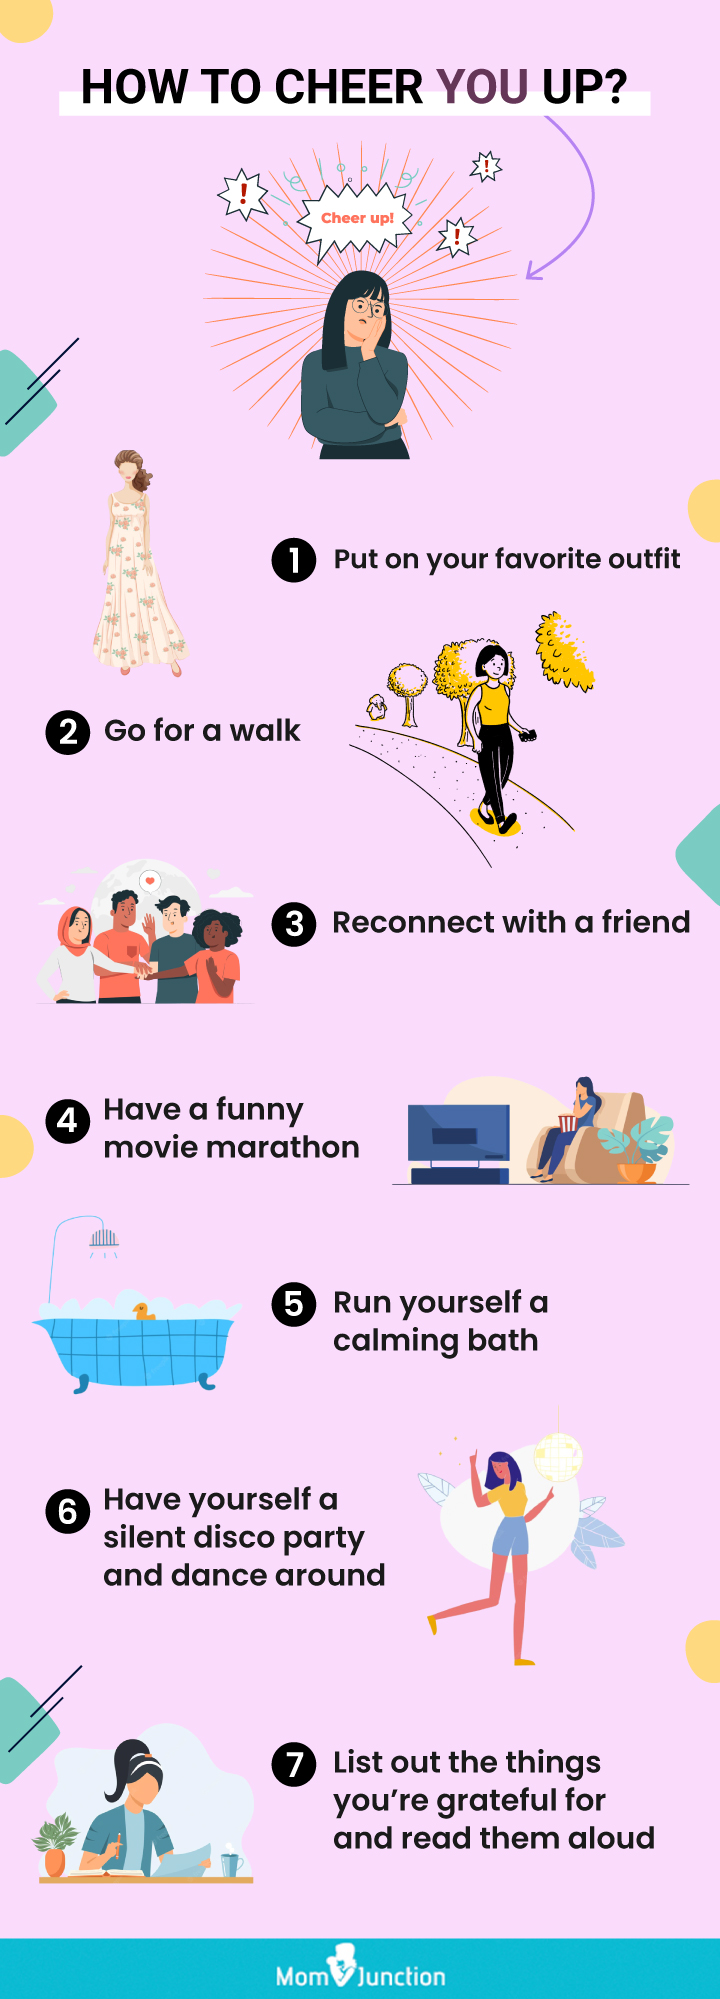 how to cheer you up (infographic)